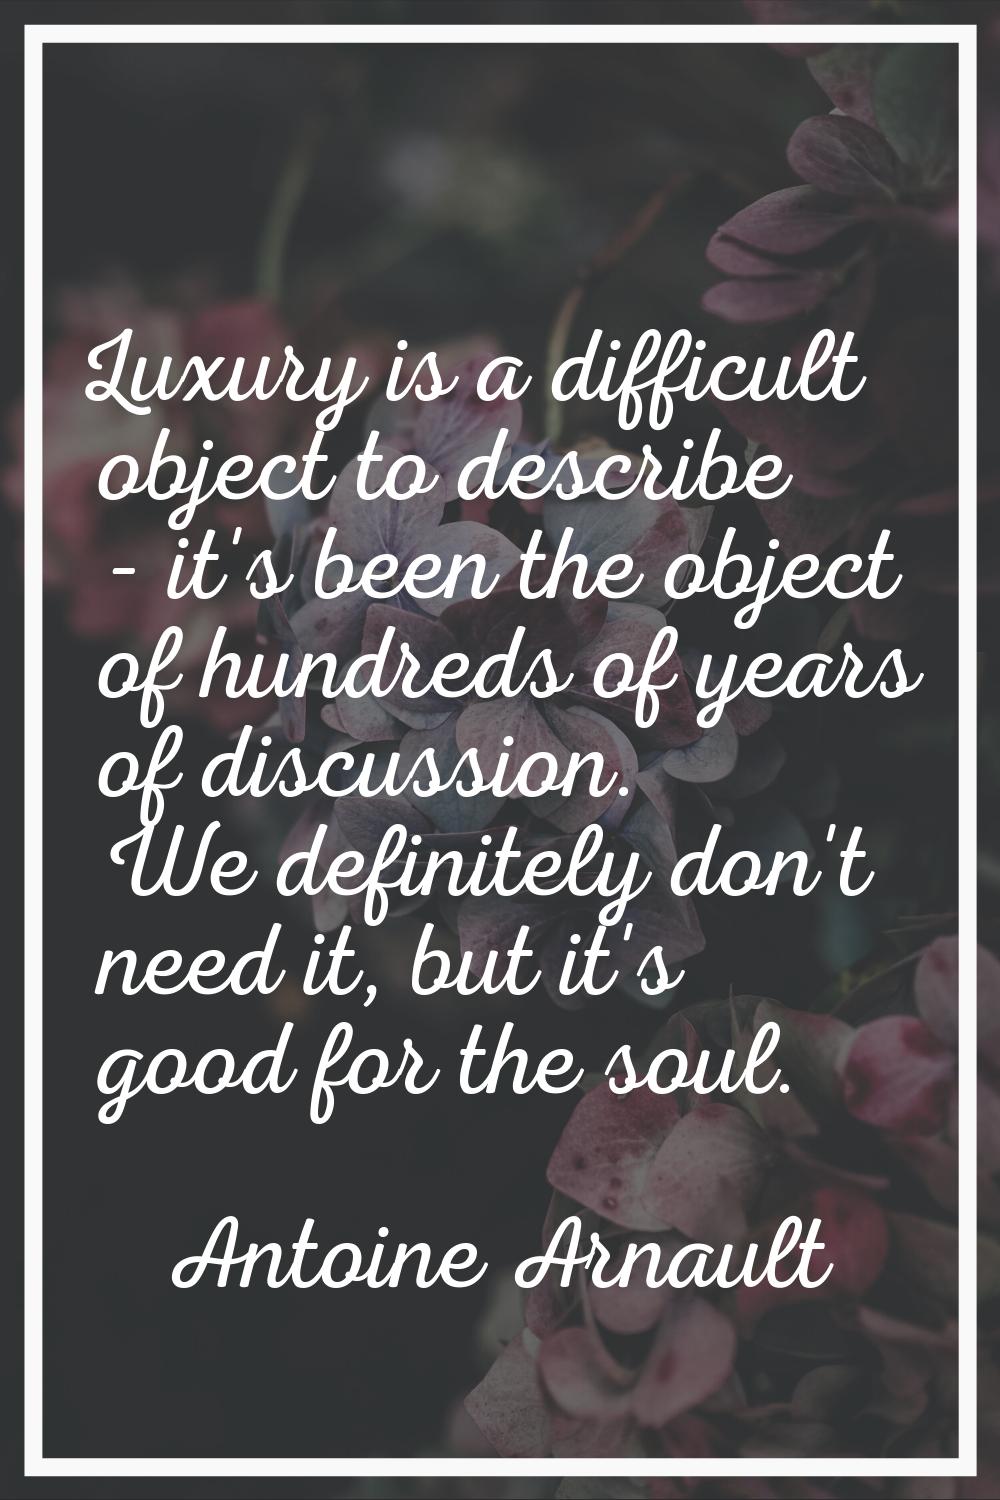 Luxury is a difficult object to describe - it's been the object of hundreds of years of discussion.